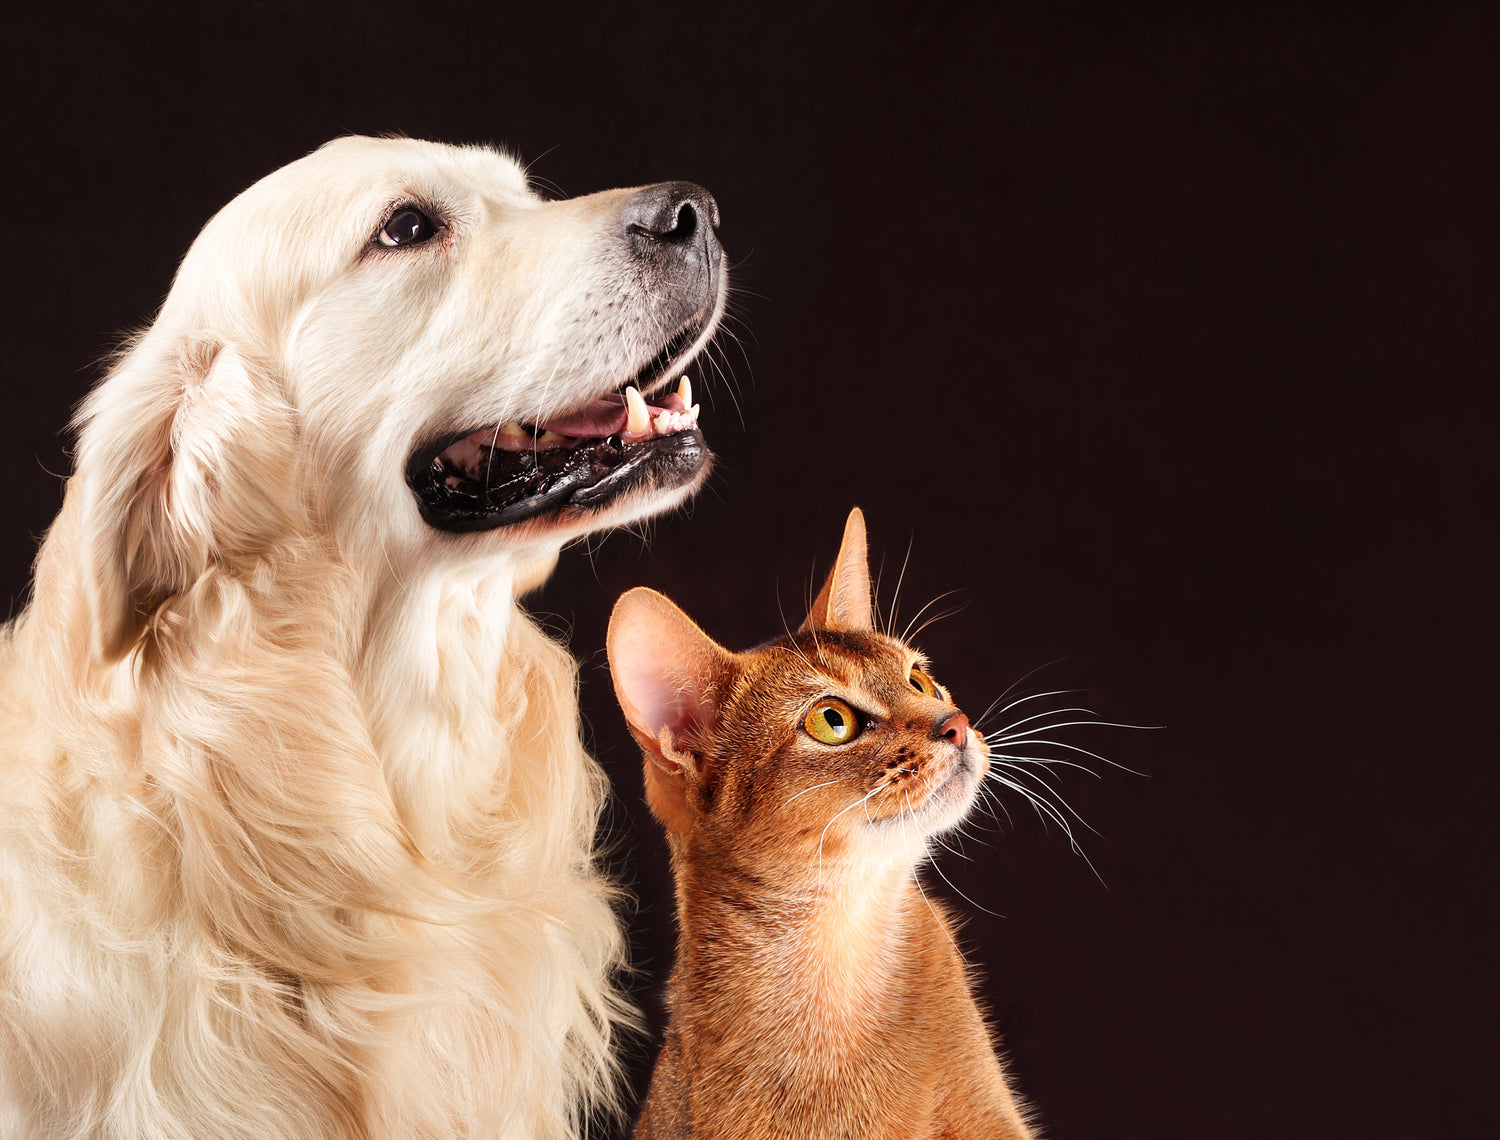 Neema's Pets homepage photo of a Golden Retriever with a cat, both looking up against a complete black background